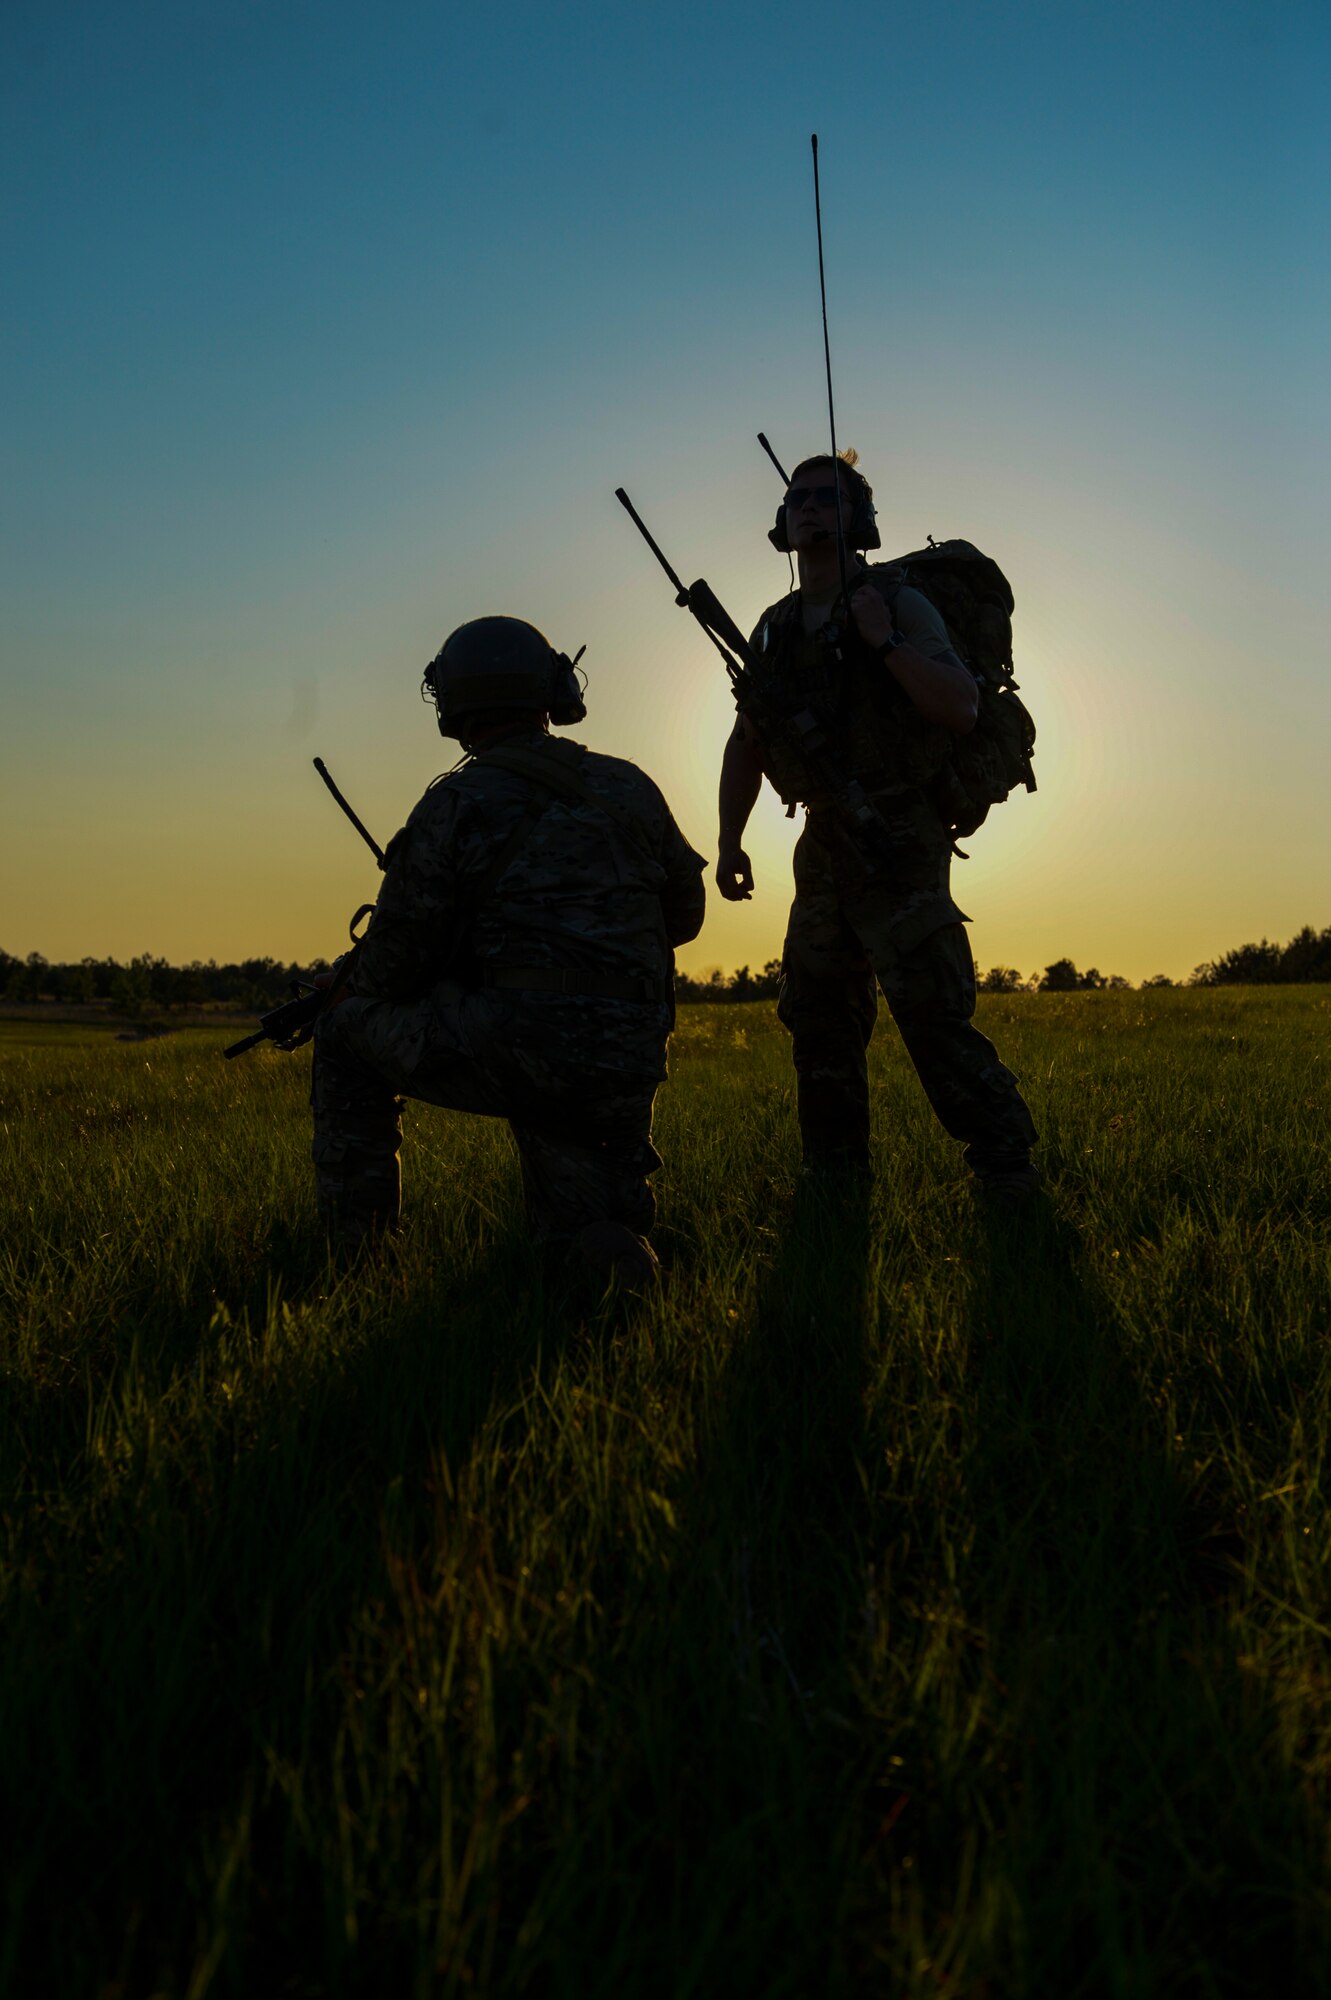 A U.S. Air Force Special Tactics Airman assigned to the 24th Special Operations Wing pulls security while another Special Tactics Airman radios an incoming aircraft during Emerald Warrior 16 at Camp Shelby Joint Forces Training Center, Miss., May 7, 2016. Emerald Warrior is a U.S. Special Operations Command-sponsored mission rehearsal exercise during which joint special operations forces train to respond to real and emerging worldwide threats. (U.S. Air Force photo by Senior Airman Colville McFee)